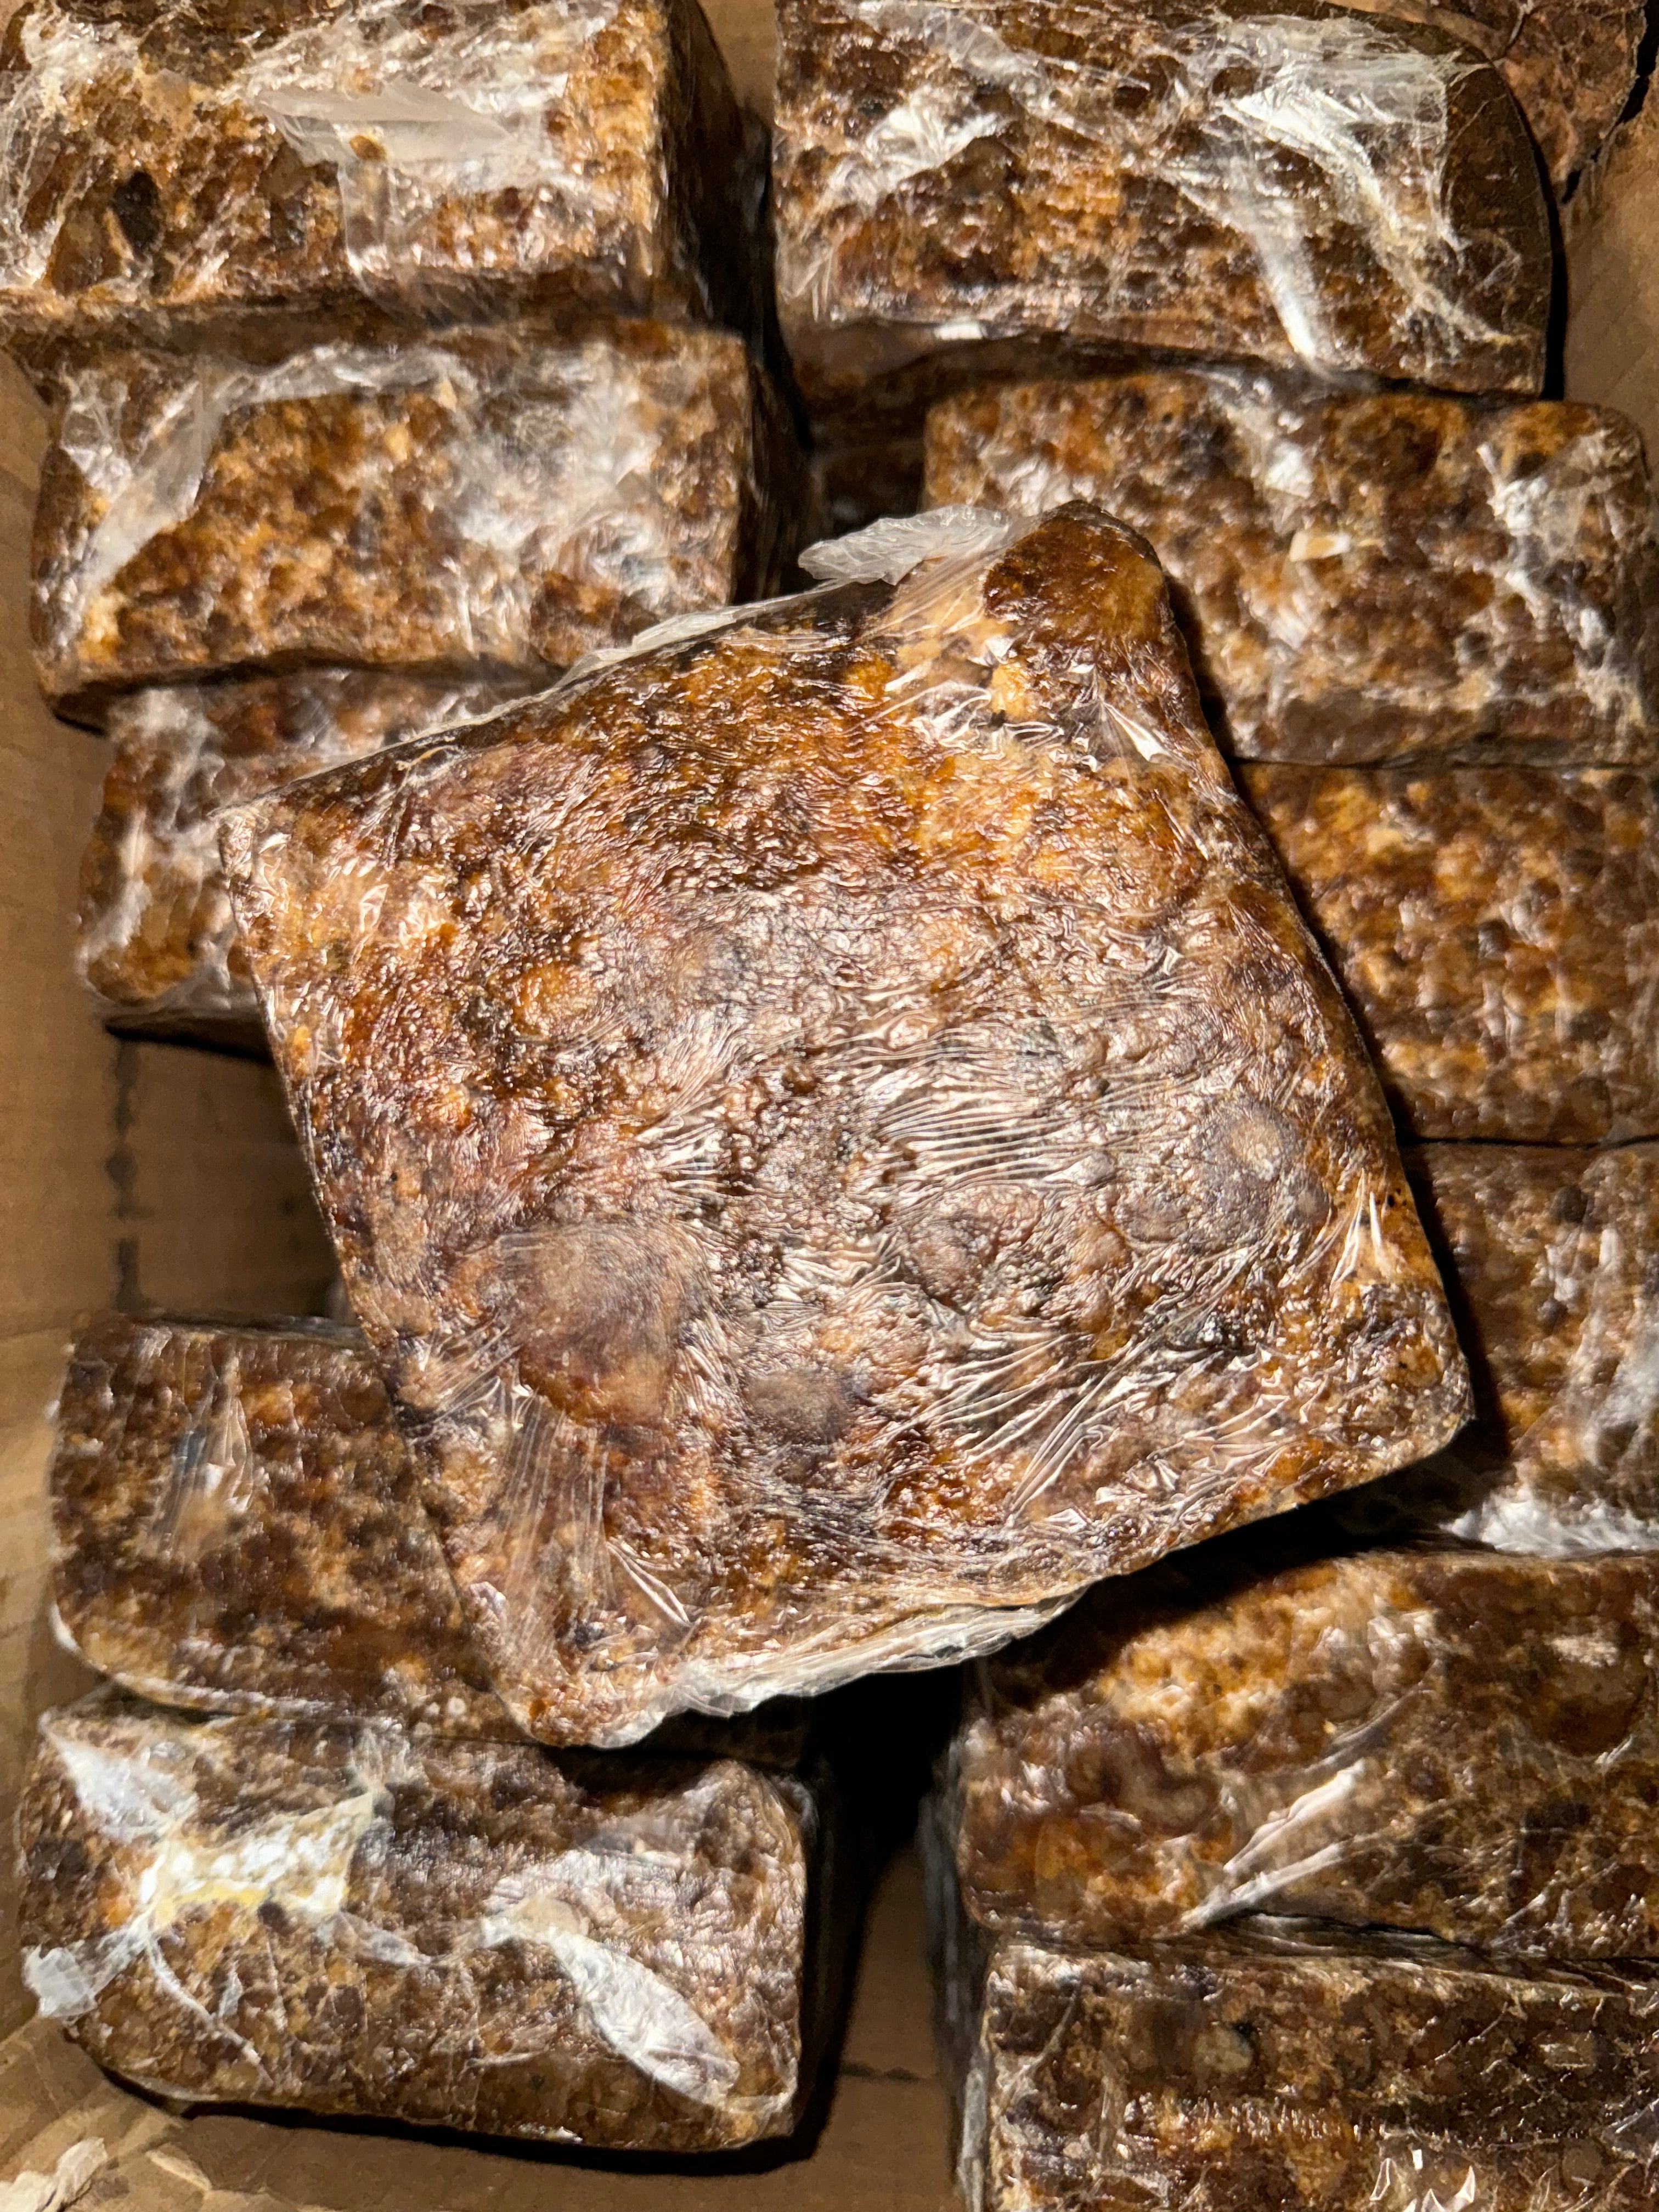 African Black Soap (Acne, Blackheads, Excessive Sweating)